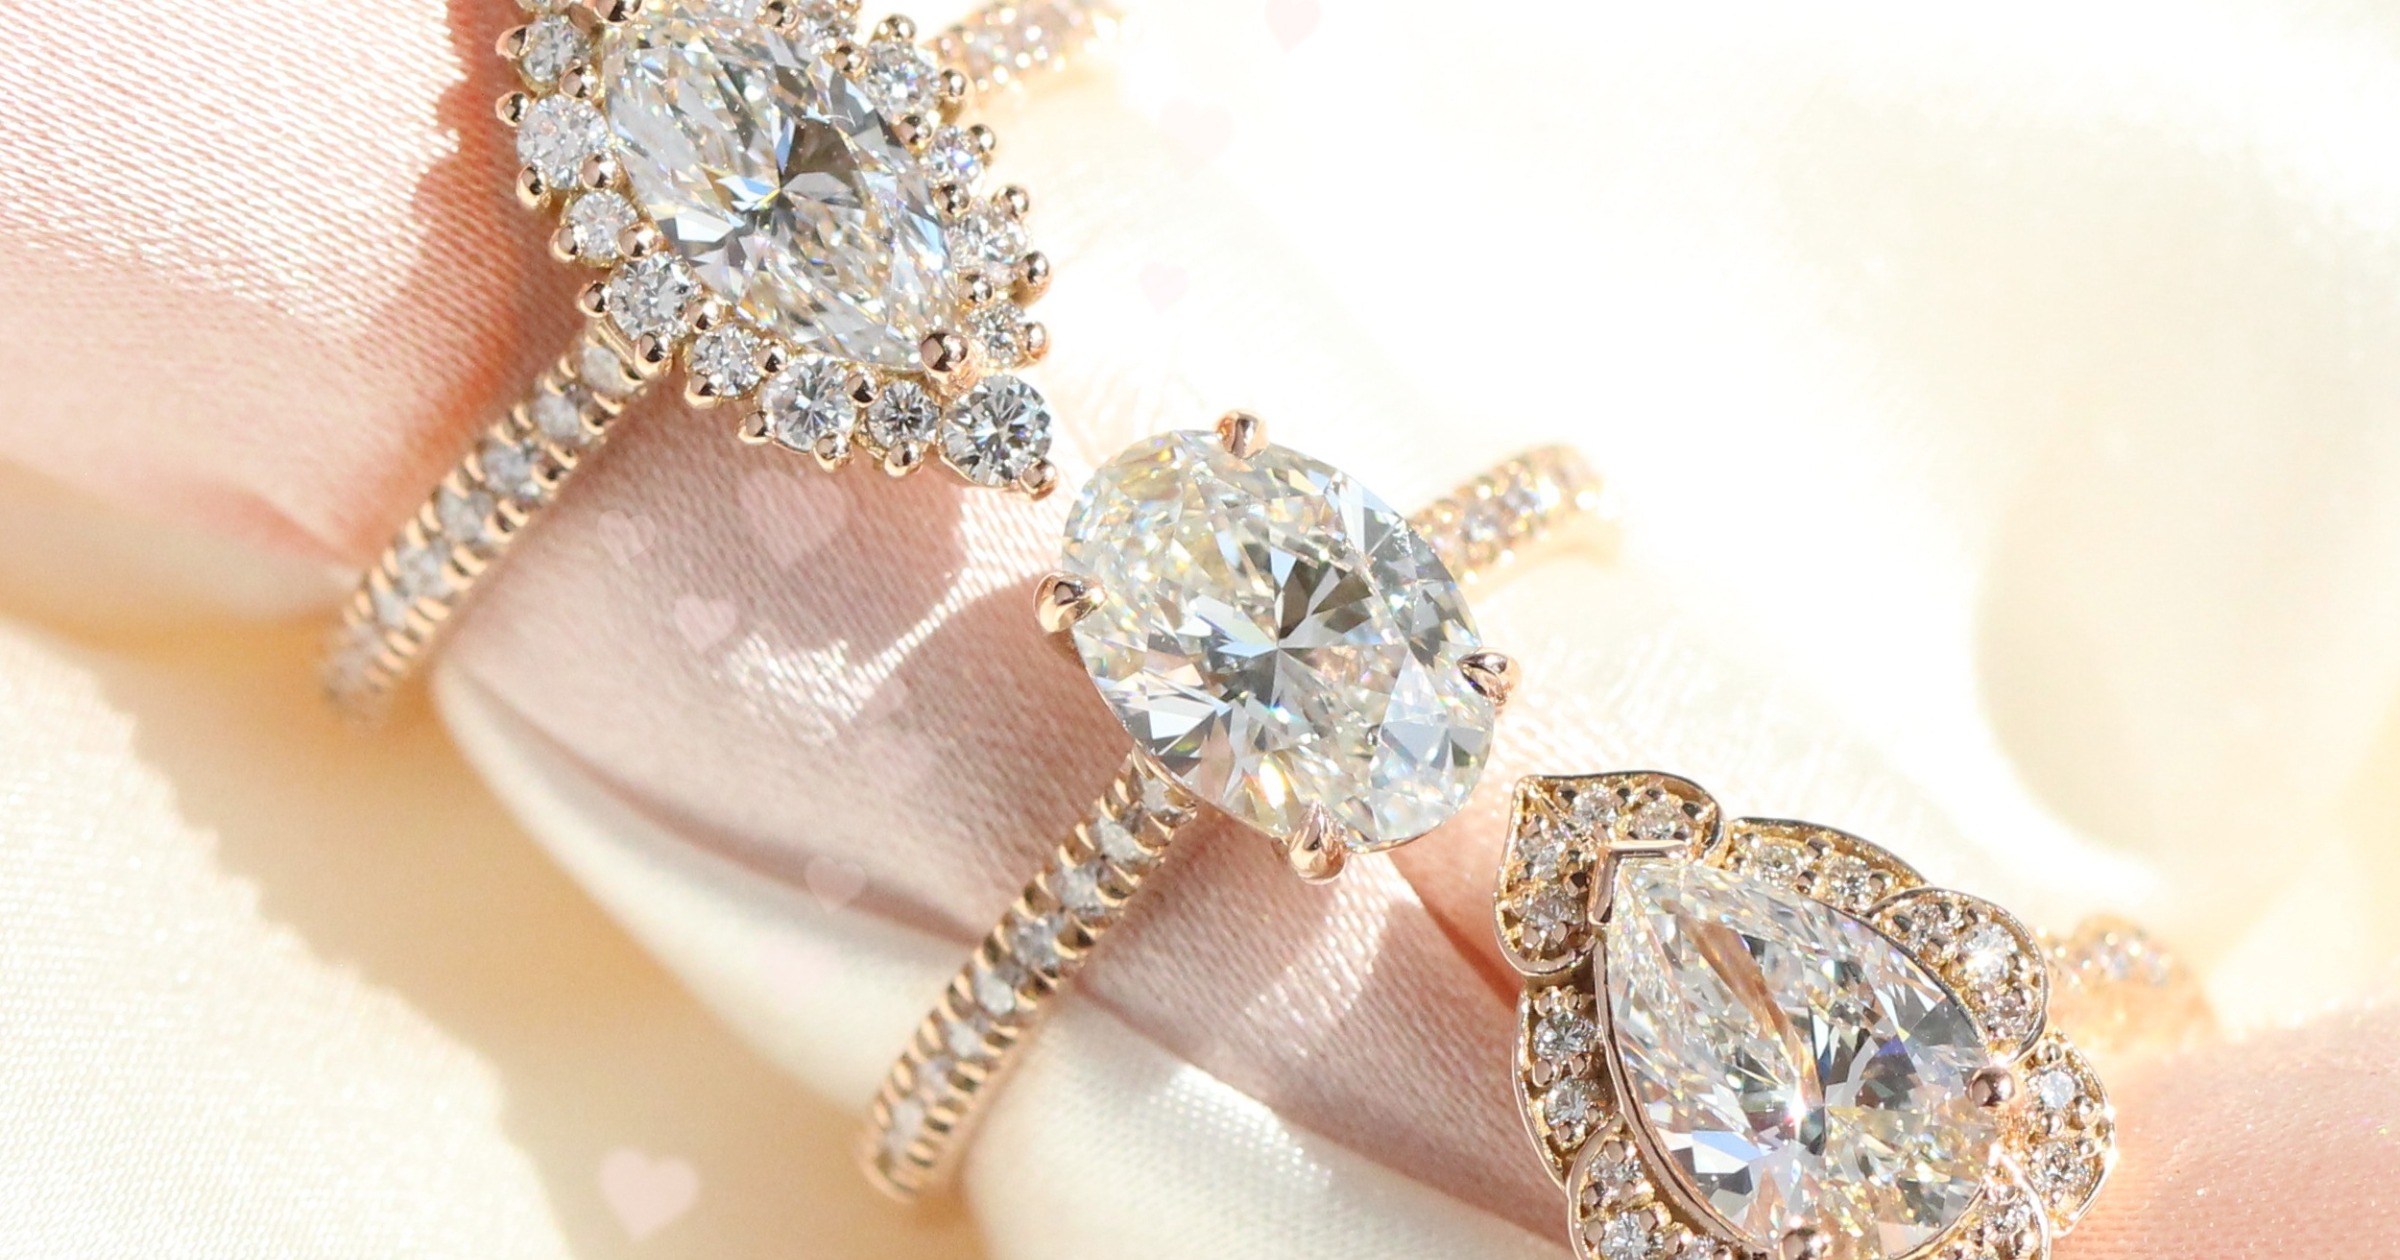 Are You Taking Care Of Your Engagement Ring? Here’s How